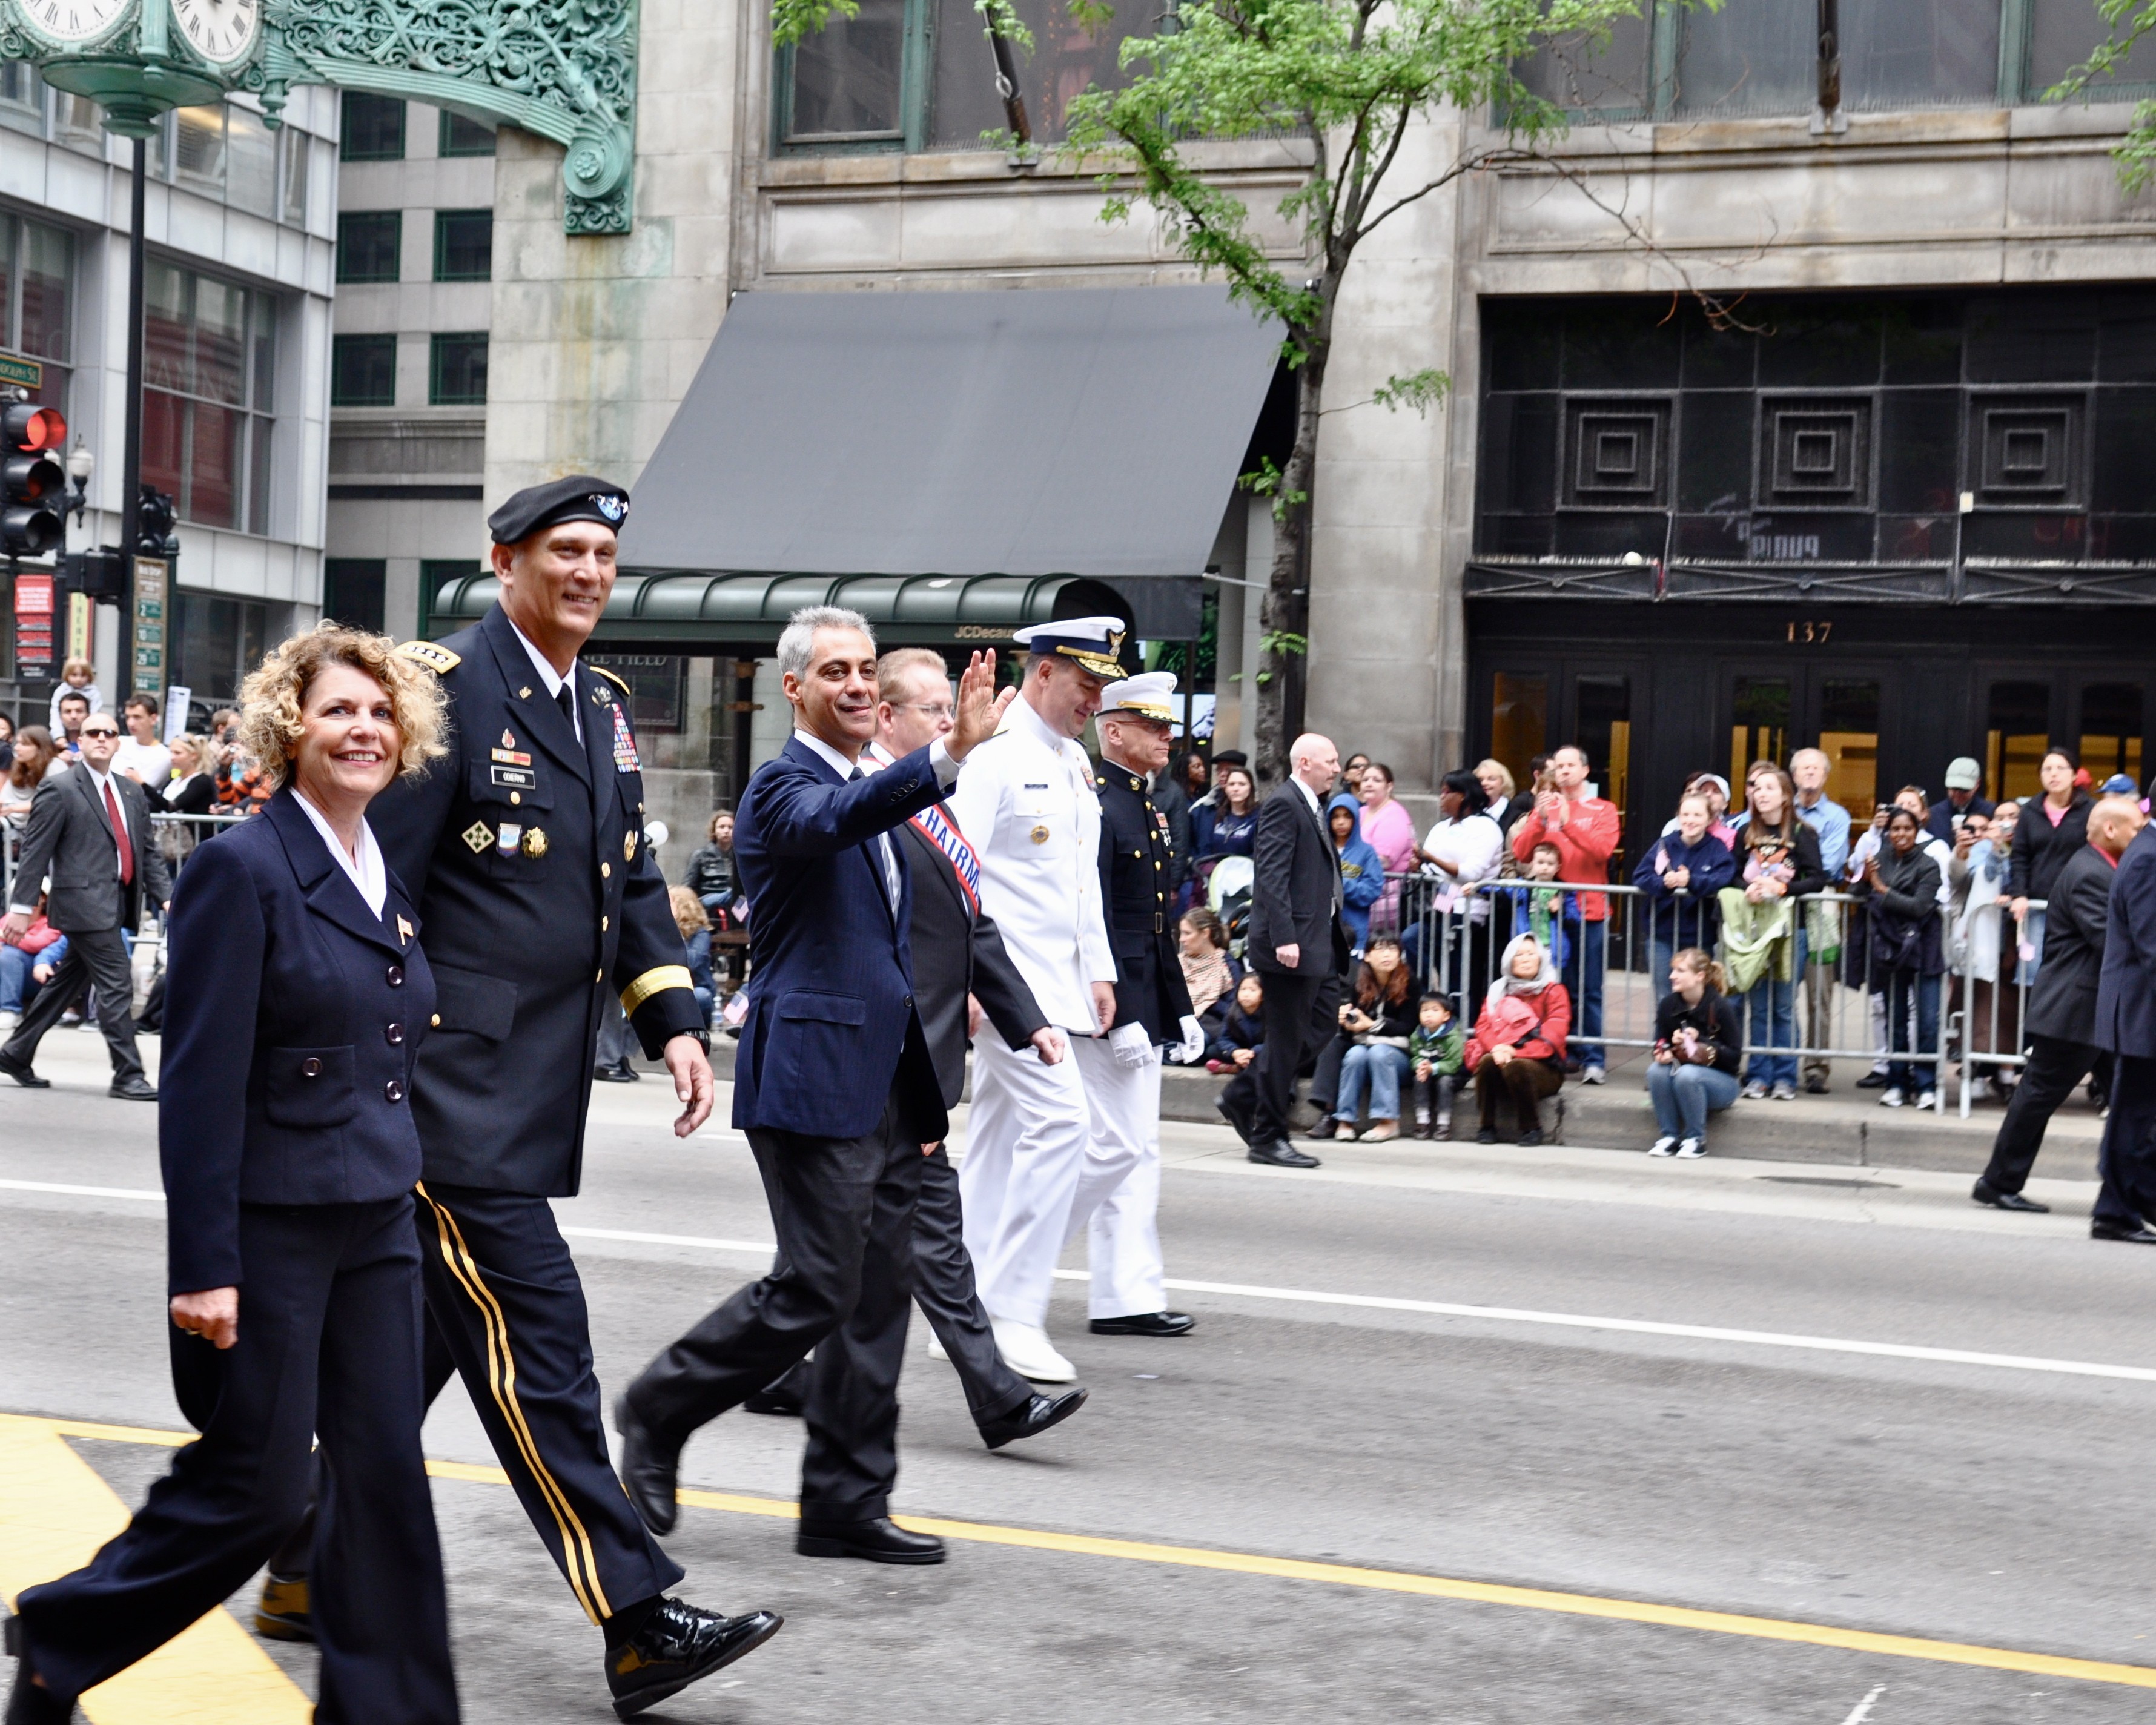 Chicago Memorial Day Ceremony and Parade Article The United States Army